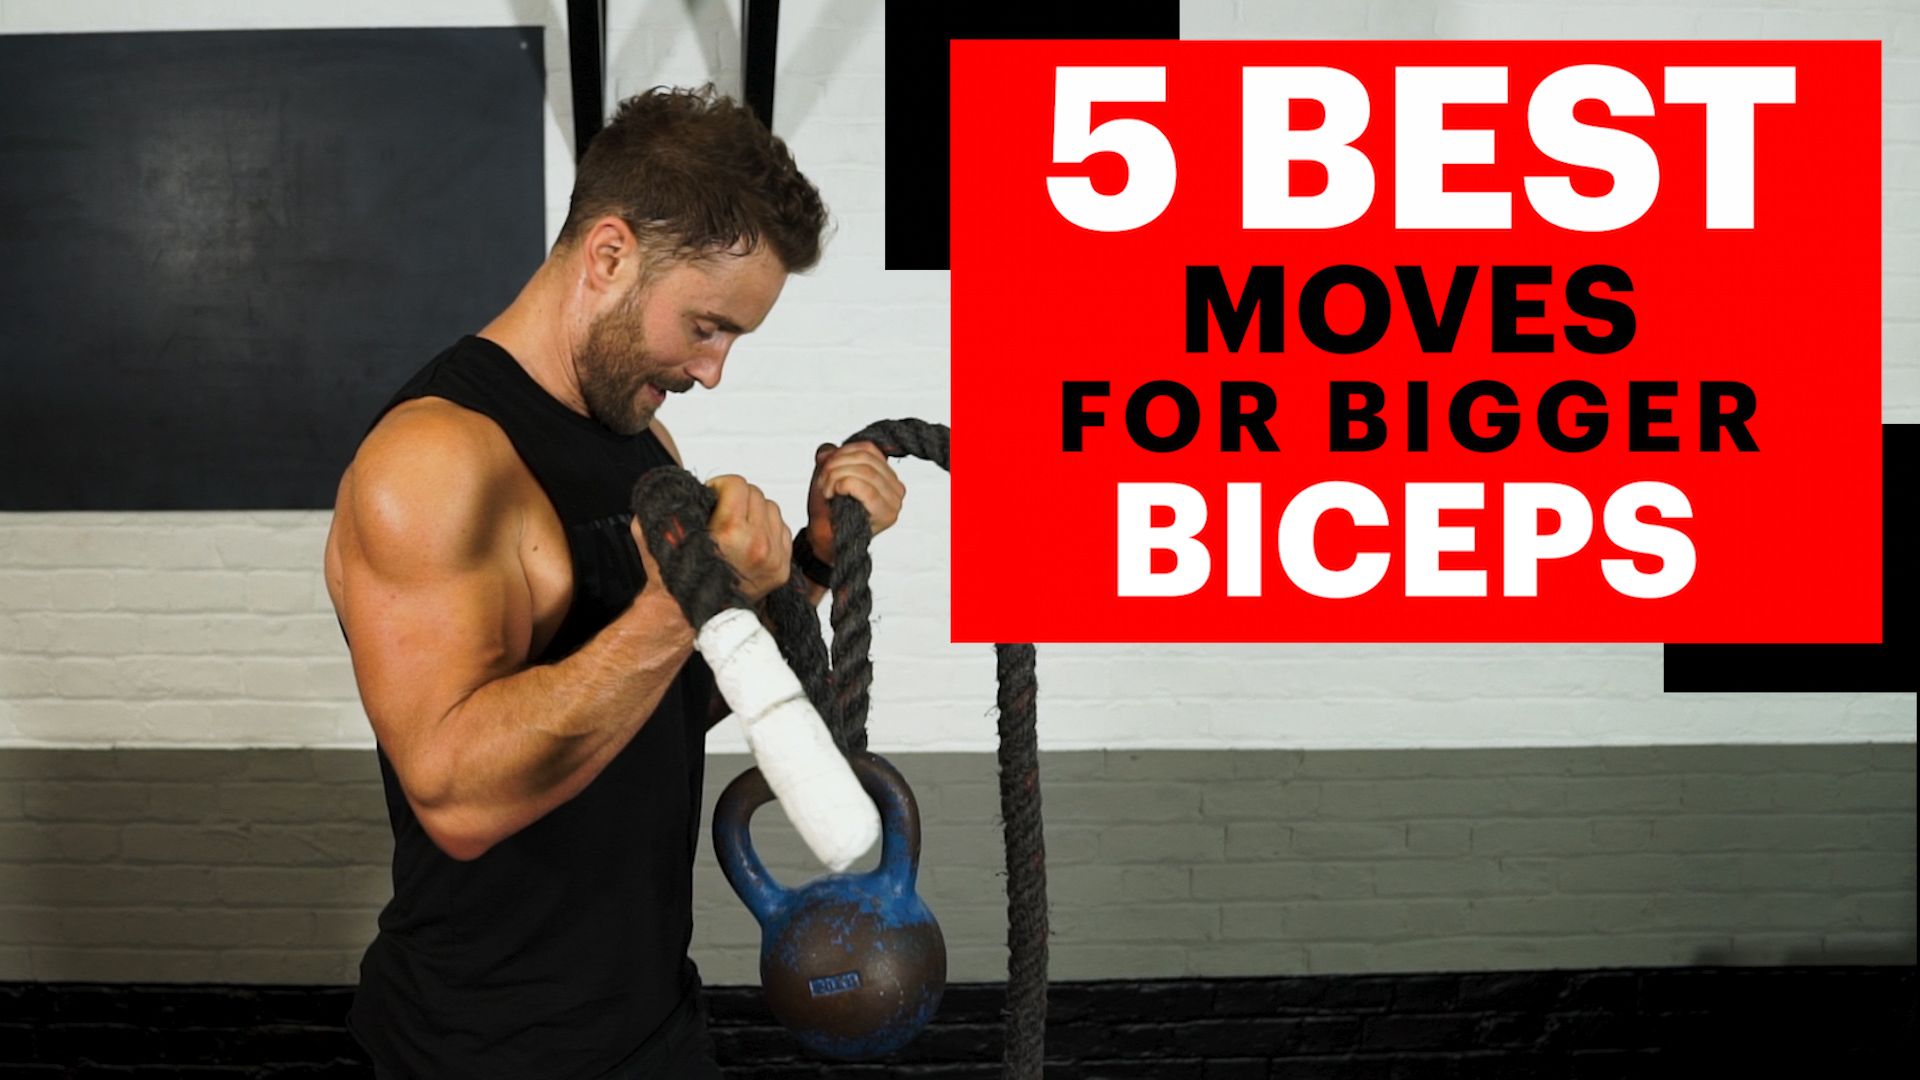 How To Build Bicep Muscle - Plantforce21